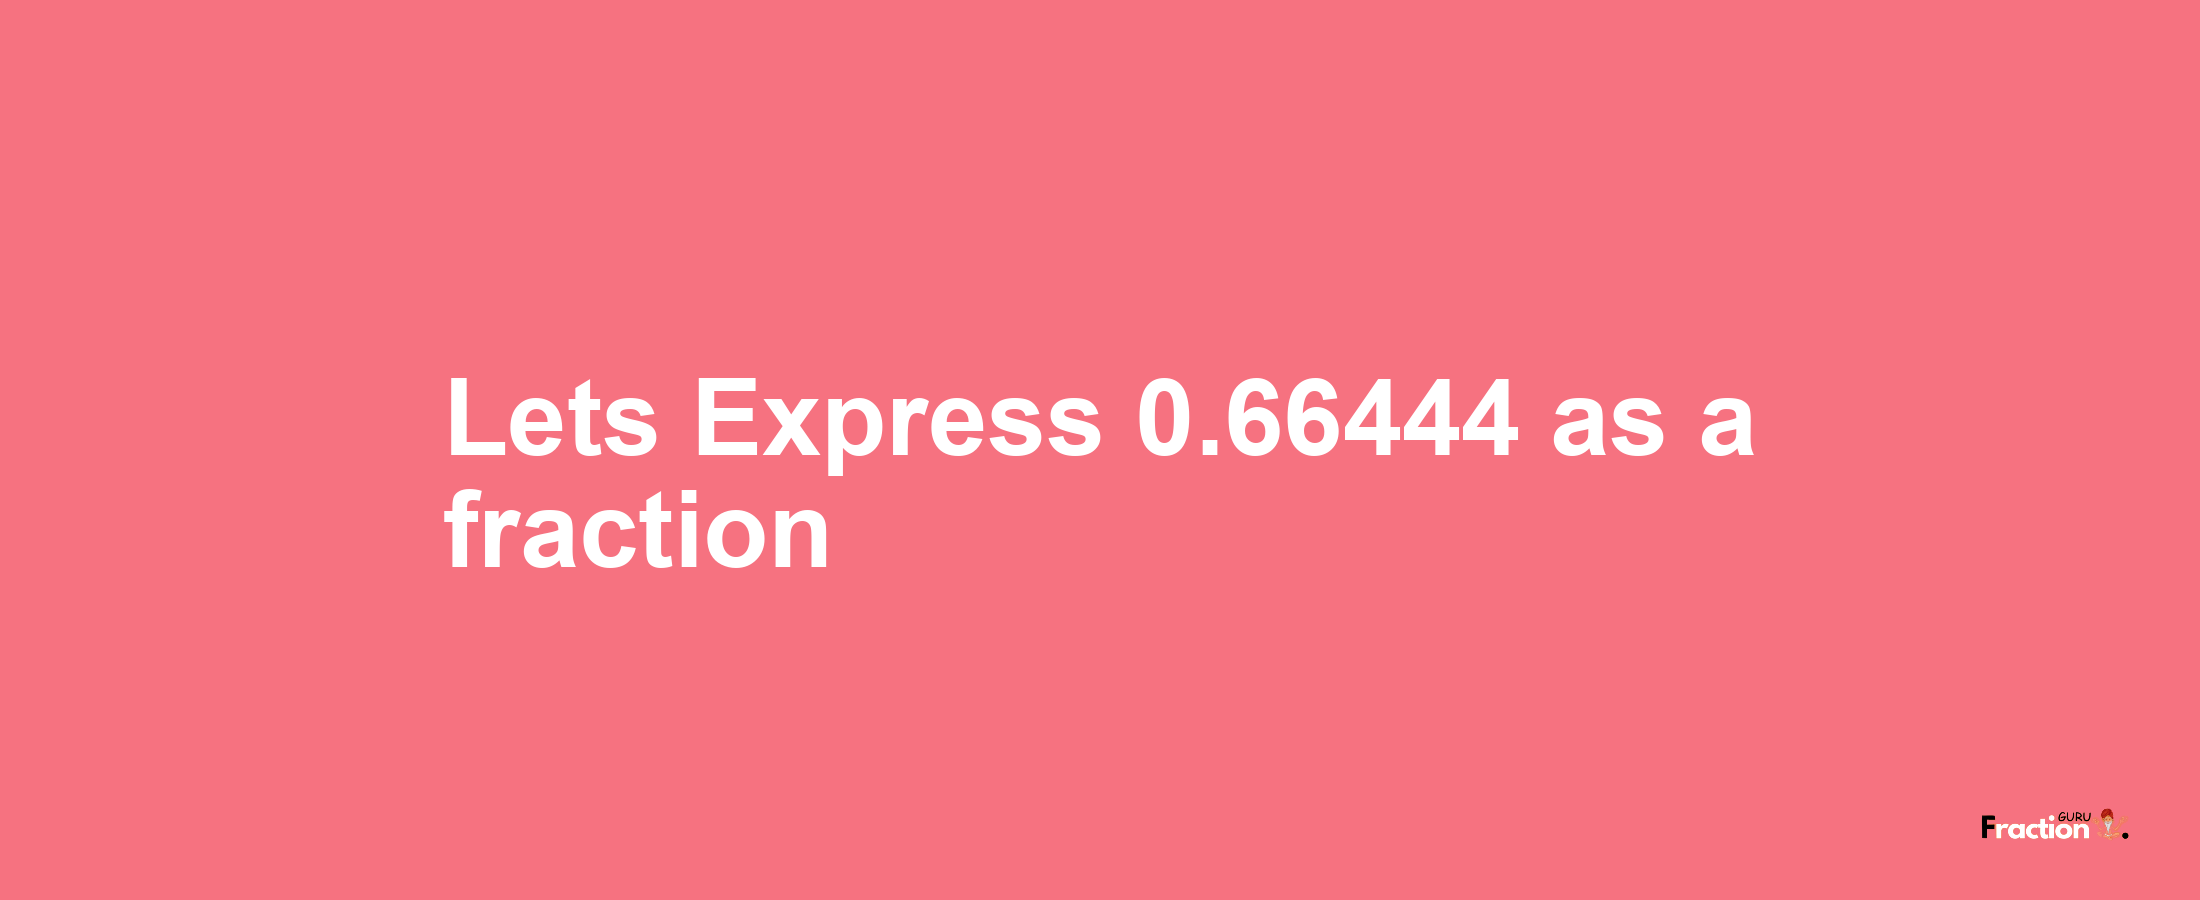 Lets Express 0.66444 as afraction